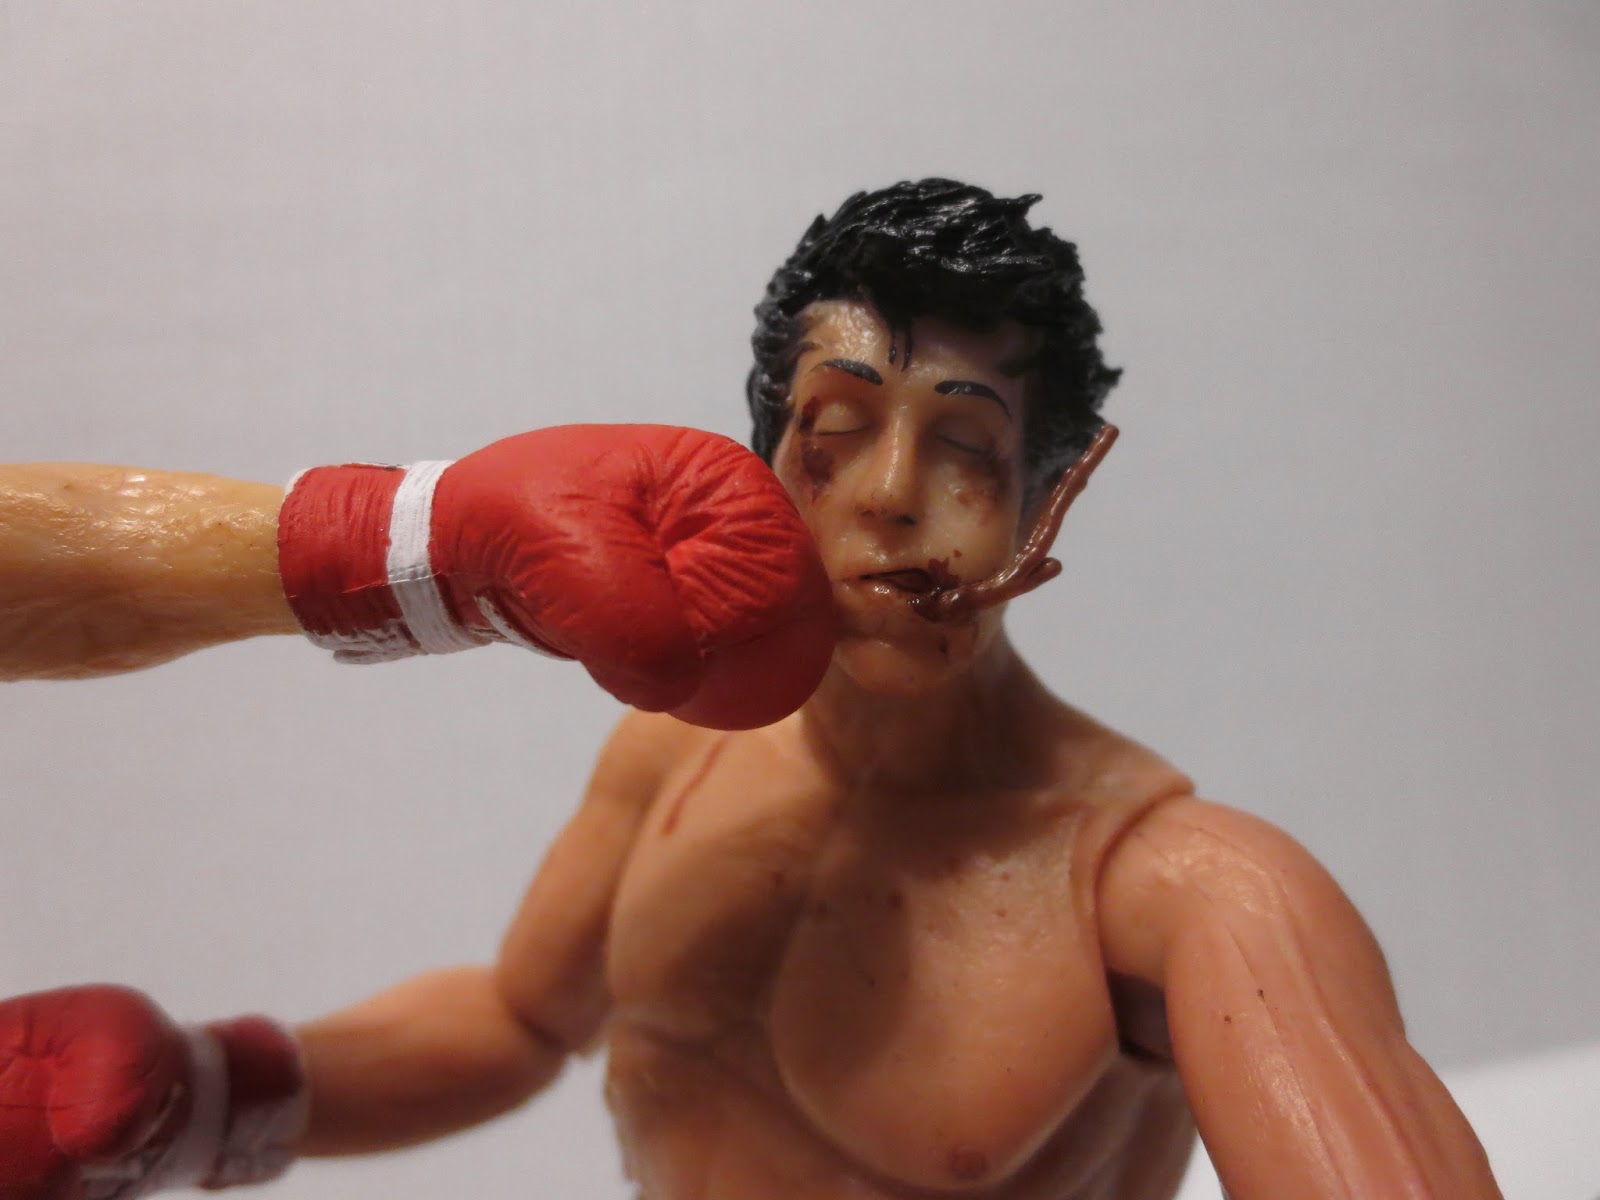 rocky iv action figures